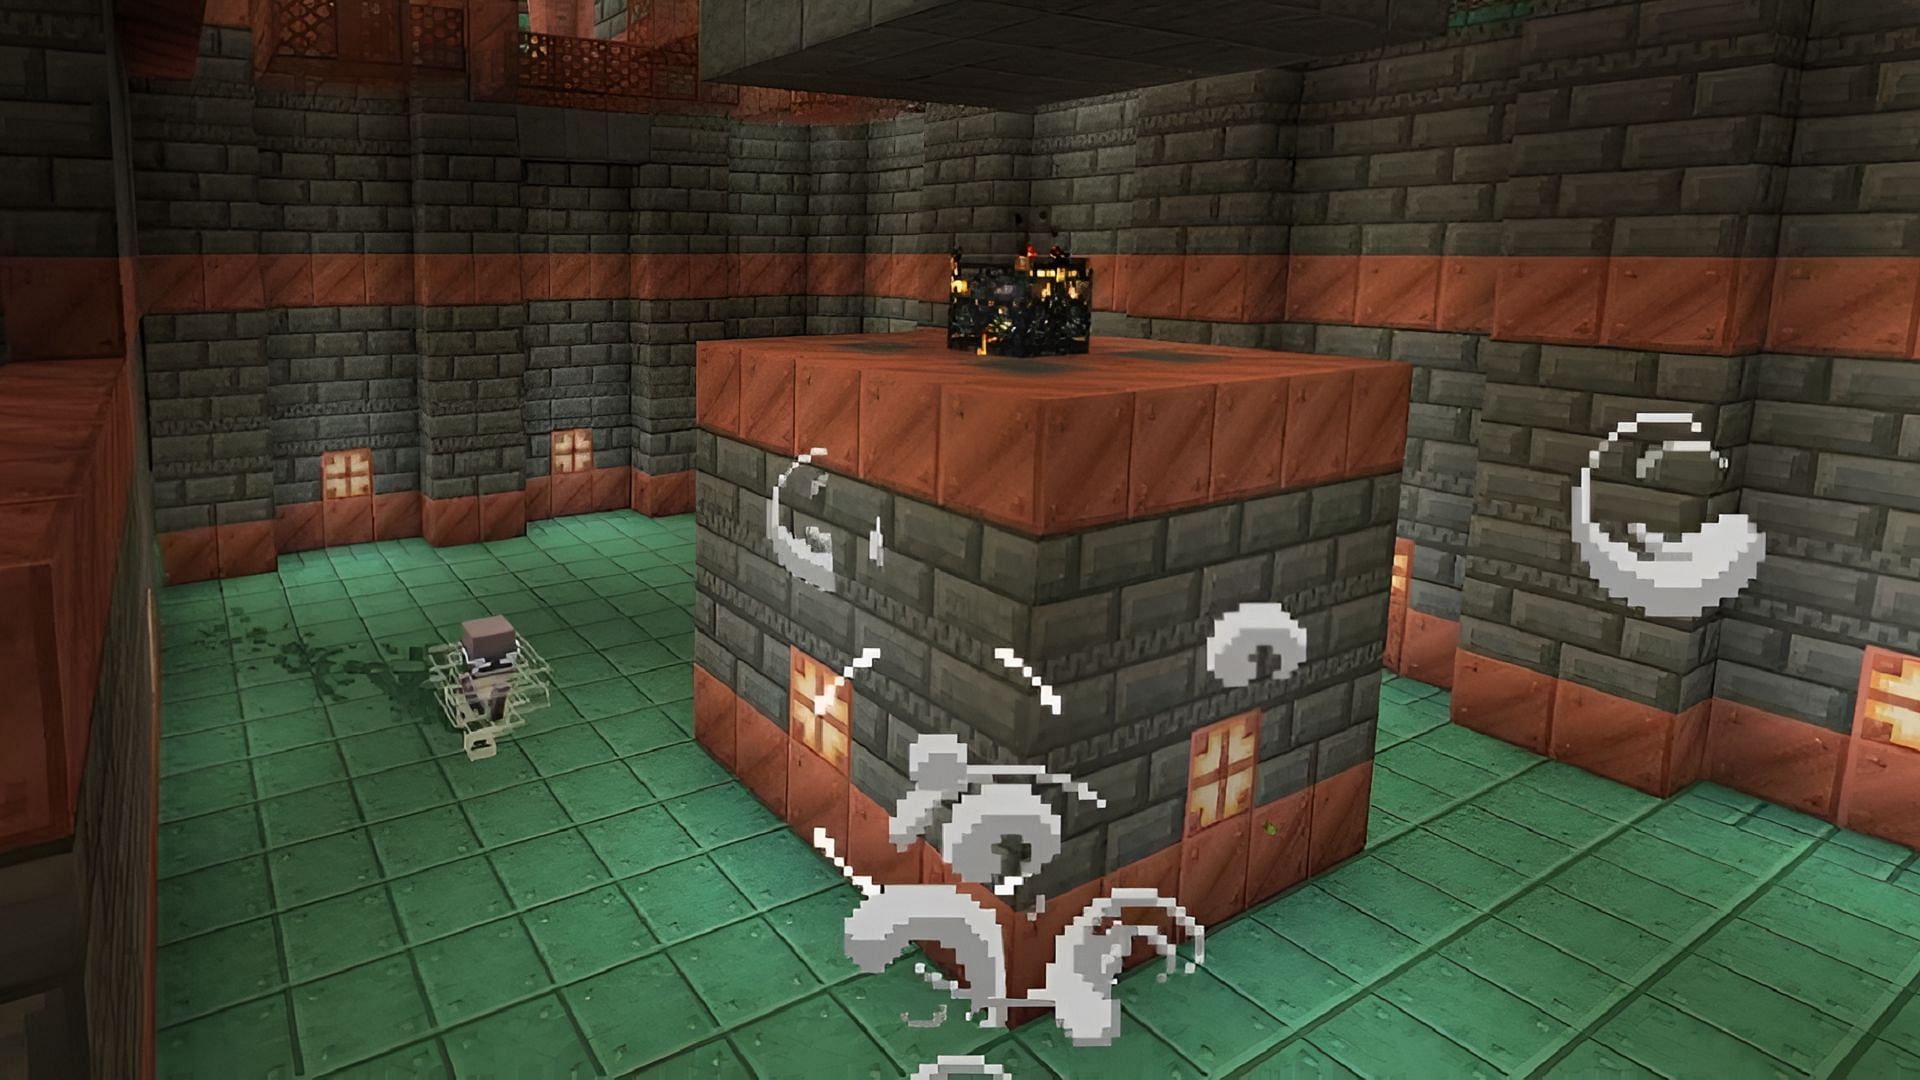 Minecraft 1.21 update new structure - Trial chambers (Image via Mojang)